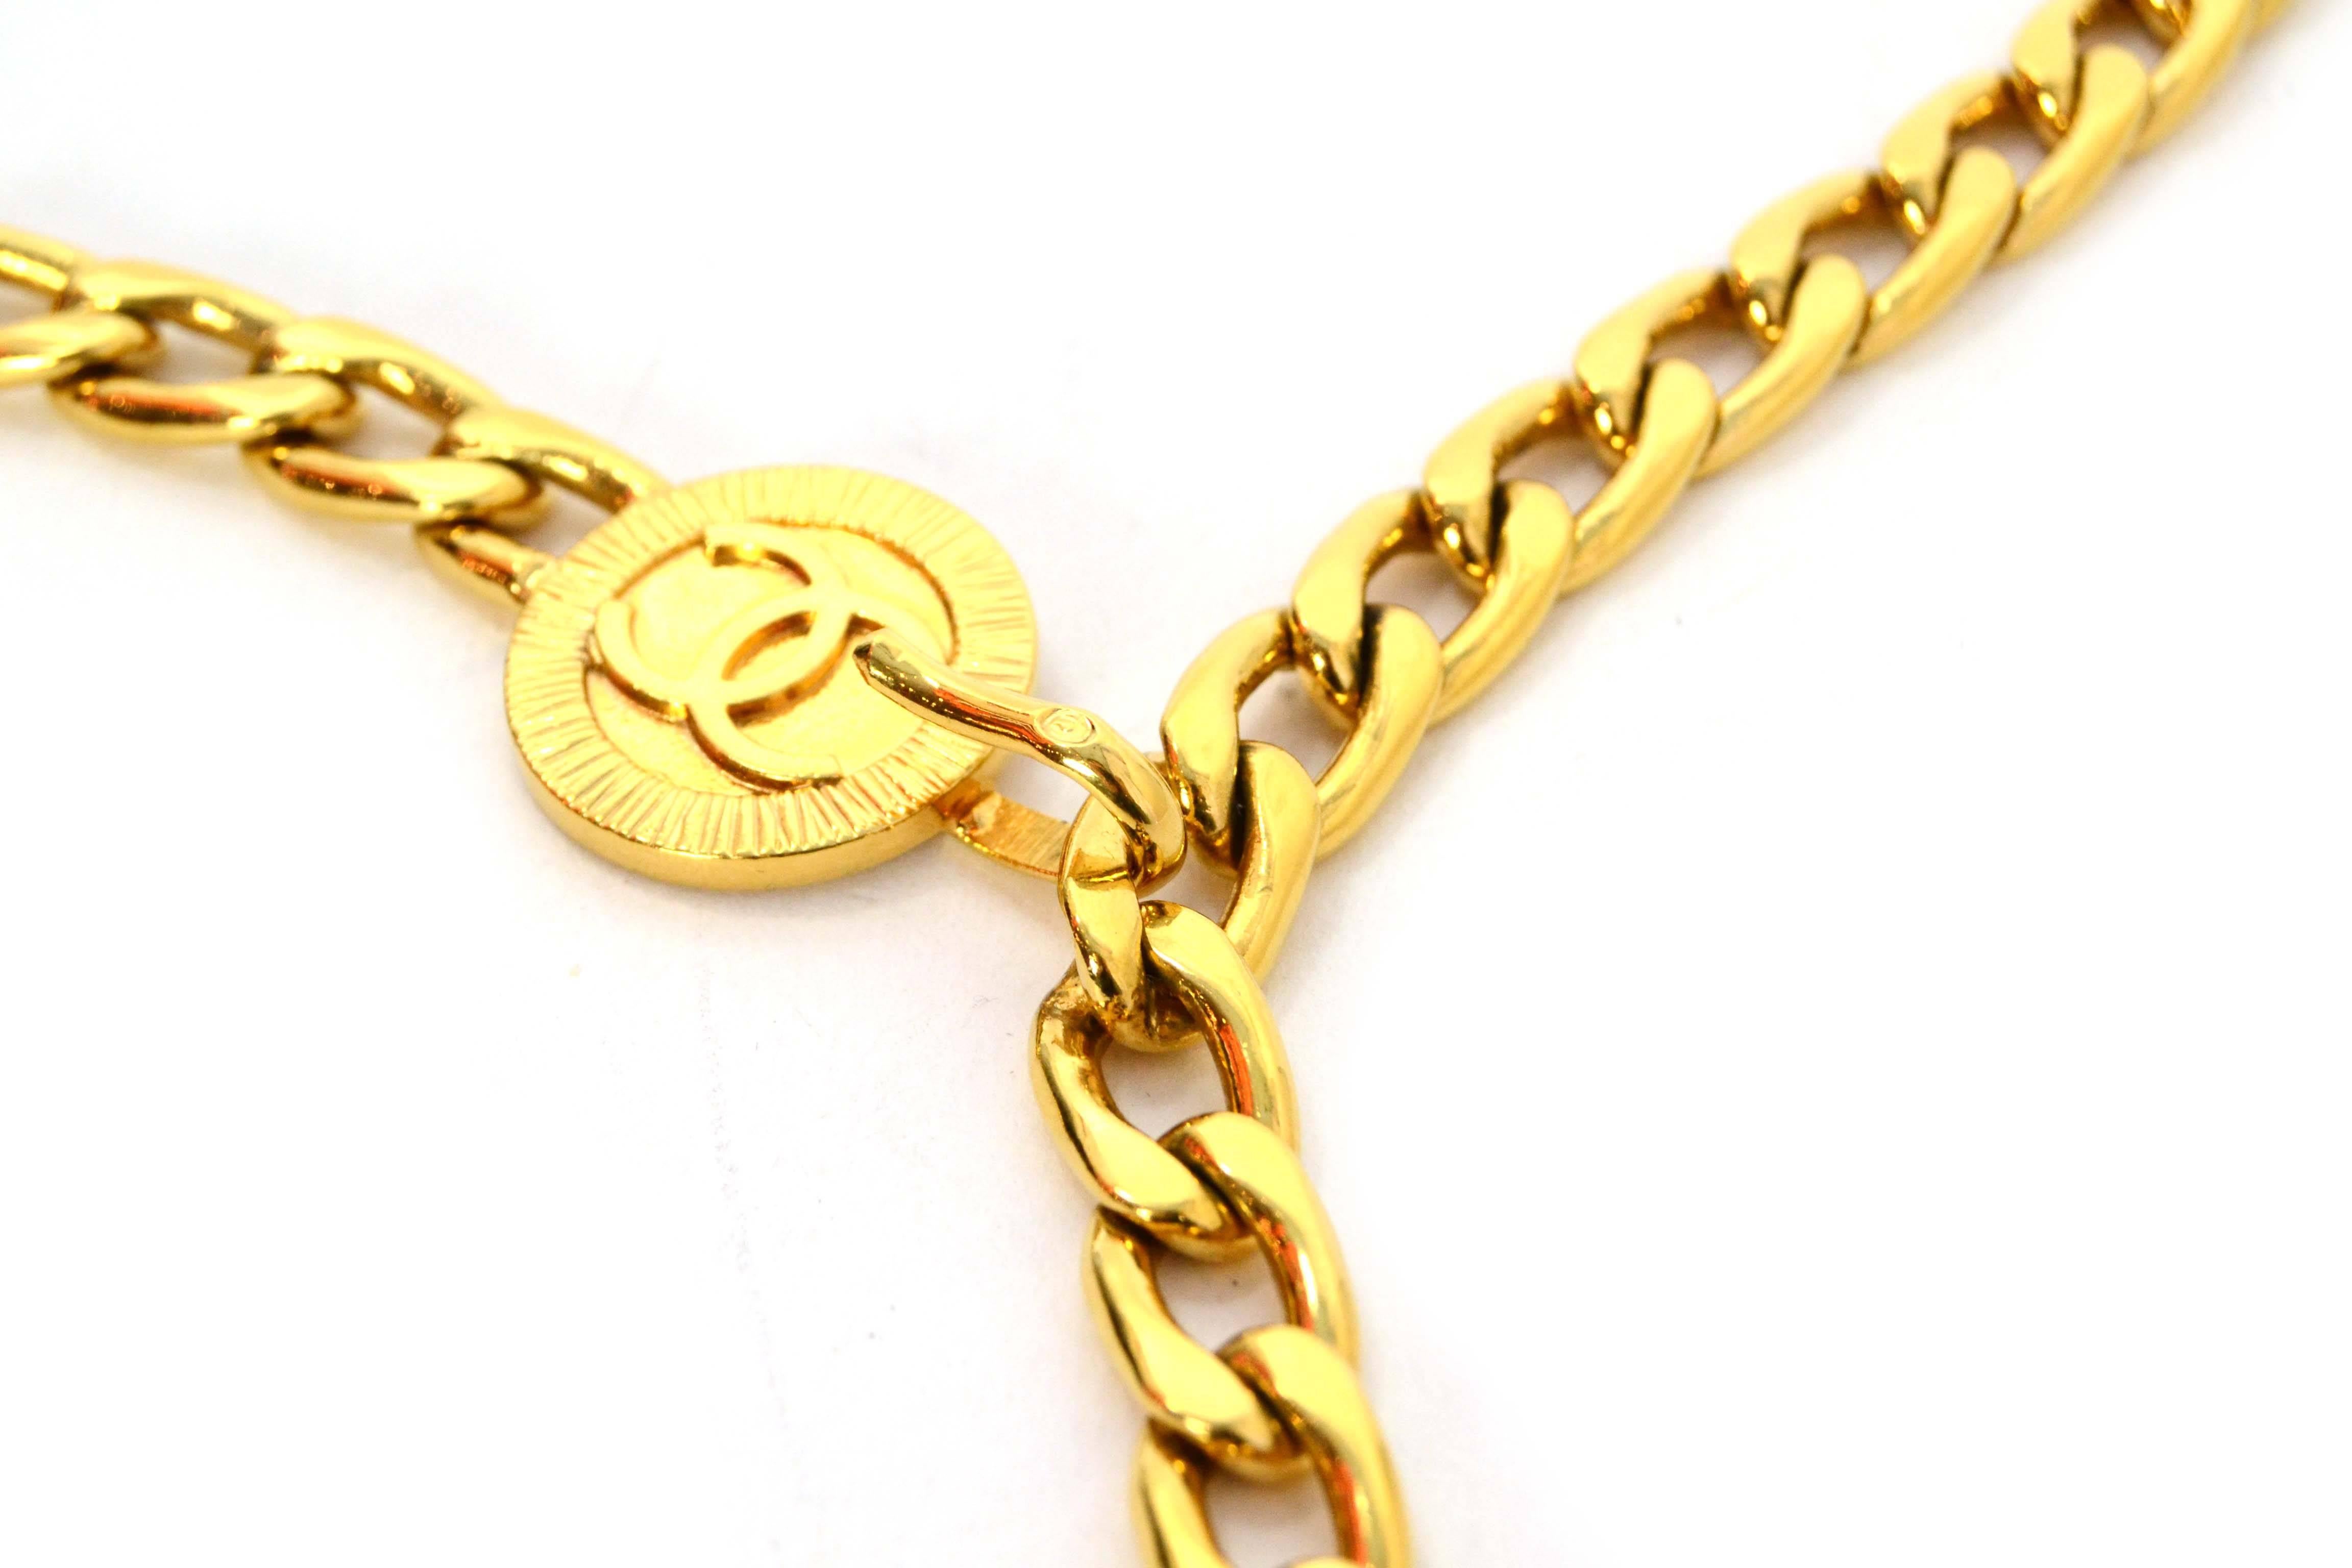 Chanel Vintage Gold Chain Link Medallion Belt 
Color: Goldtone
Materials: Metal
Closure: Hook closure
Stamp: Chanel CC
Overall Condition: Excellent vintage, pre-owned condition
Measurements: 
Length: 36